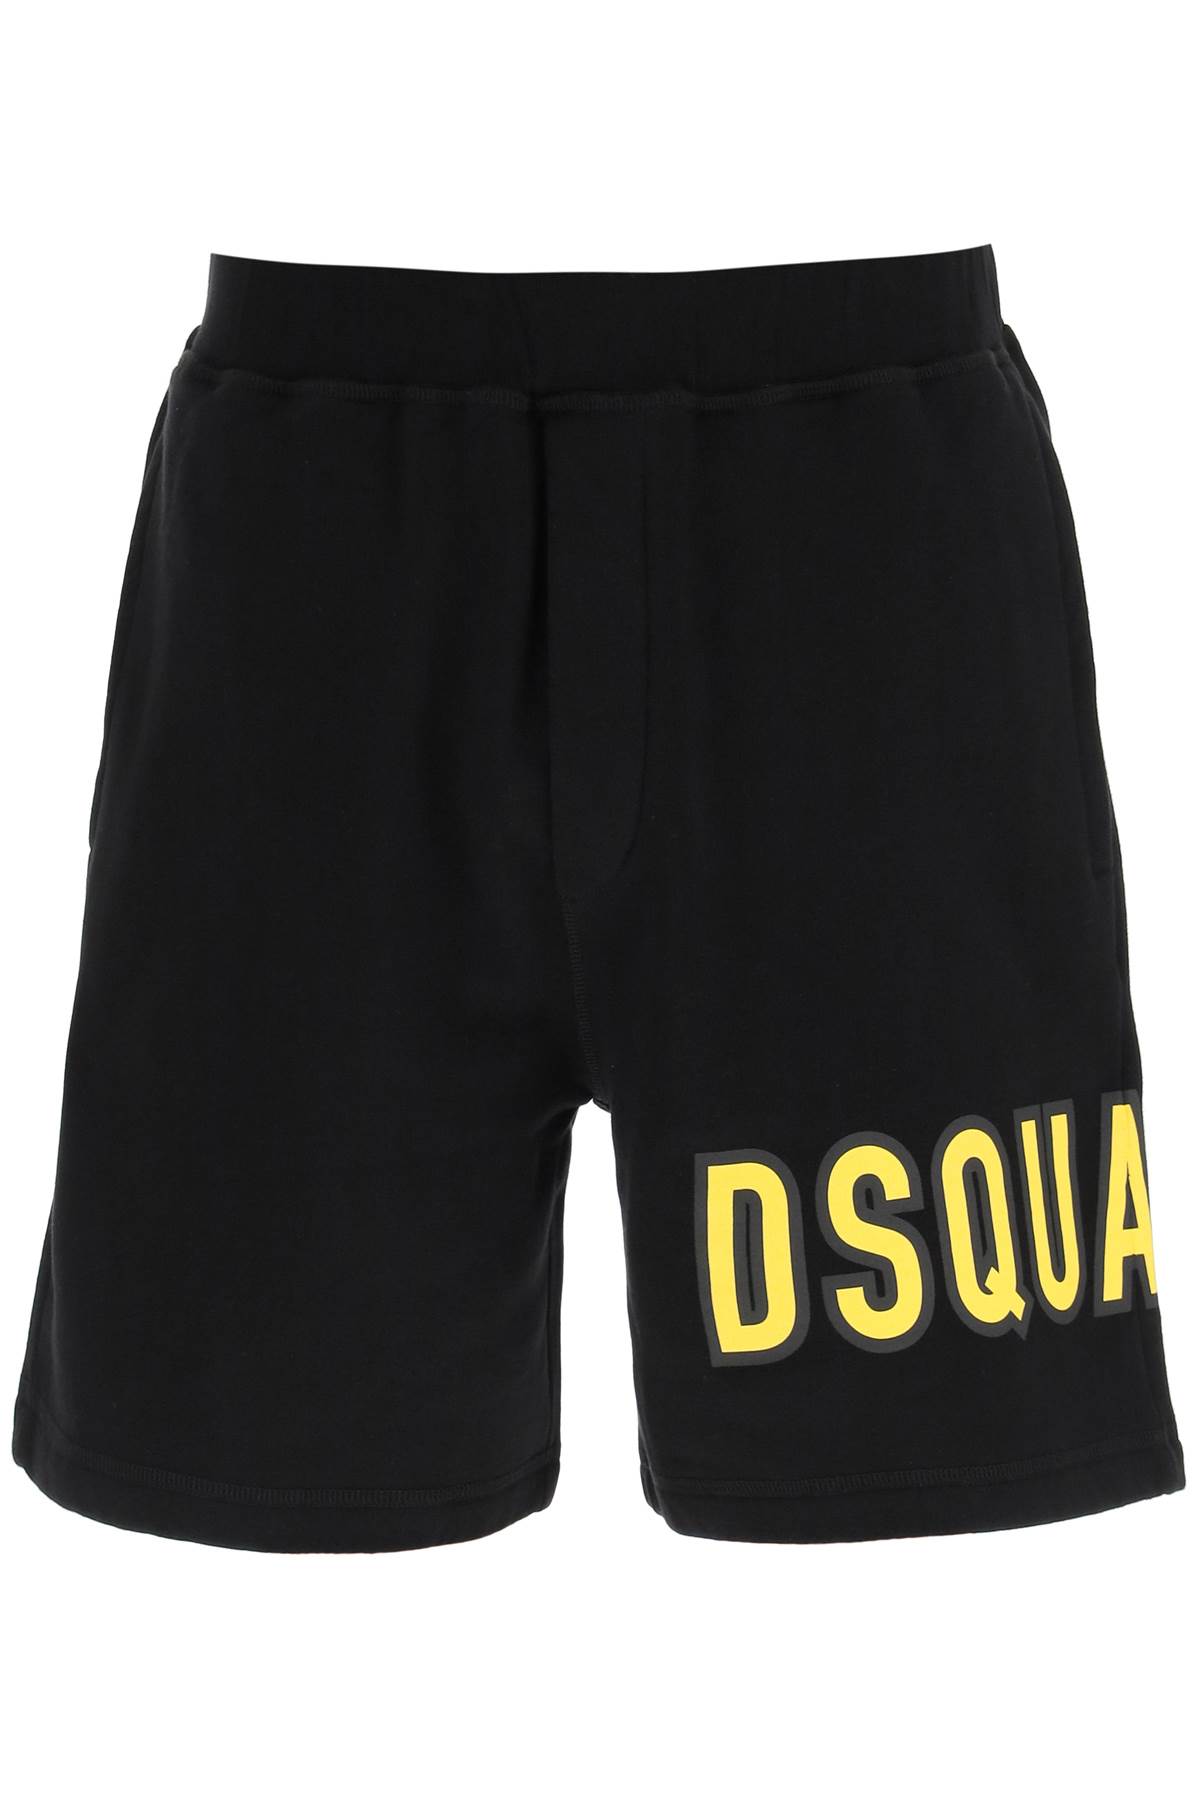 Dsquared2 Short Sweatpants With Logo